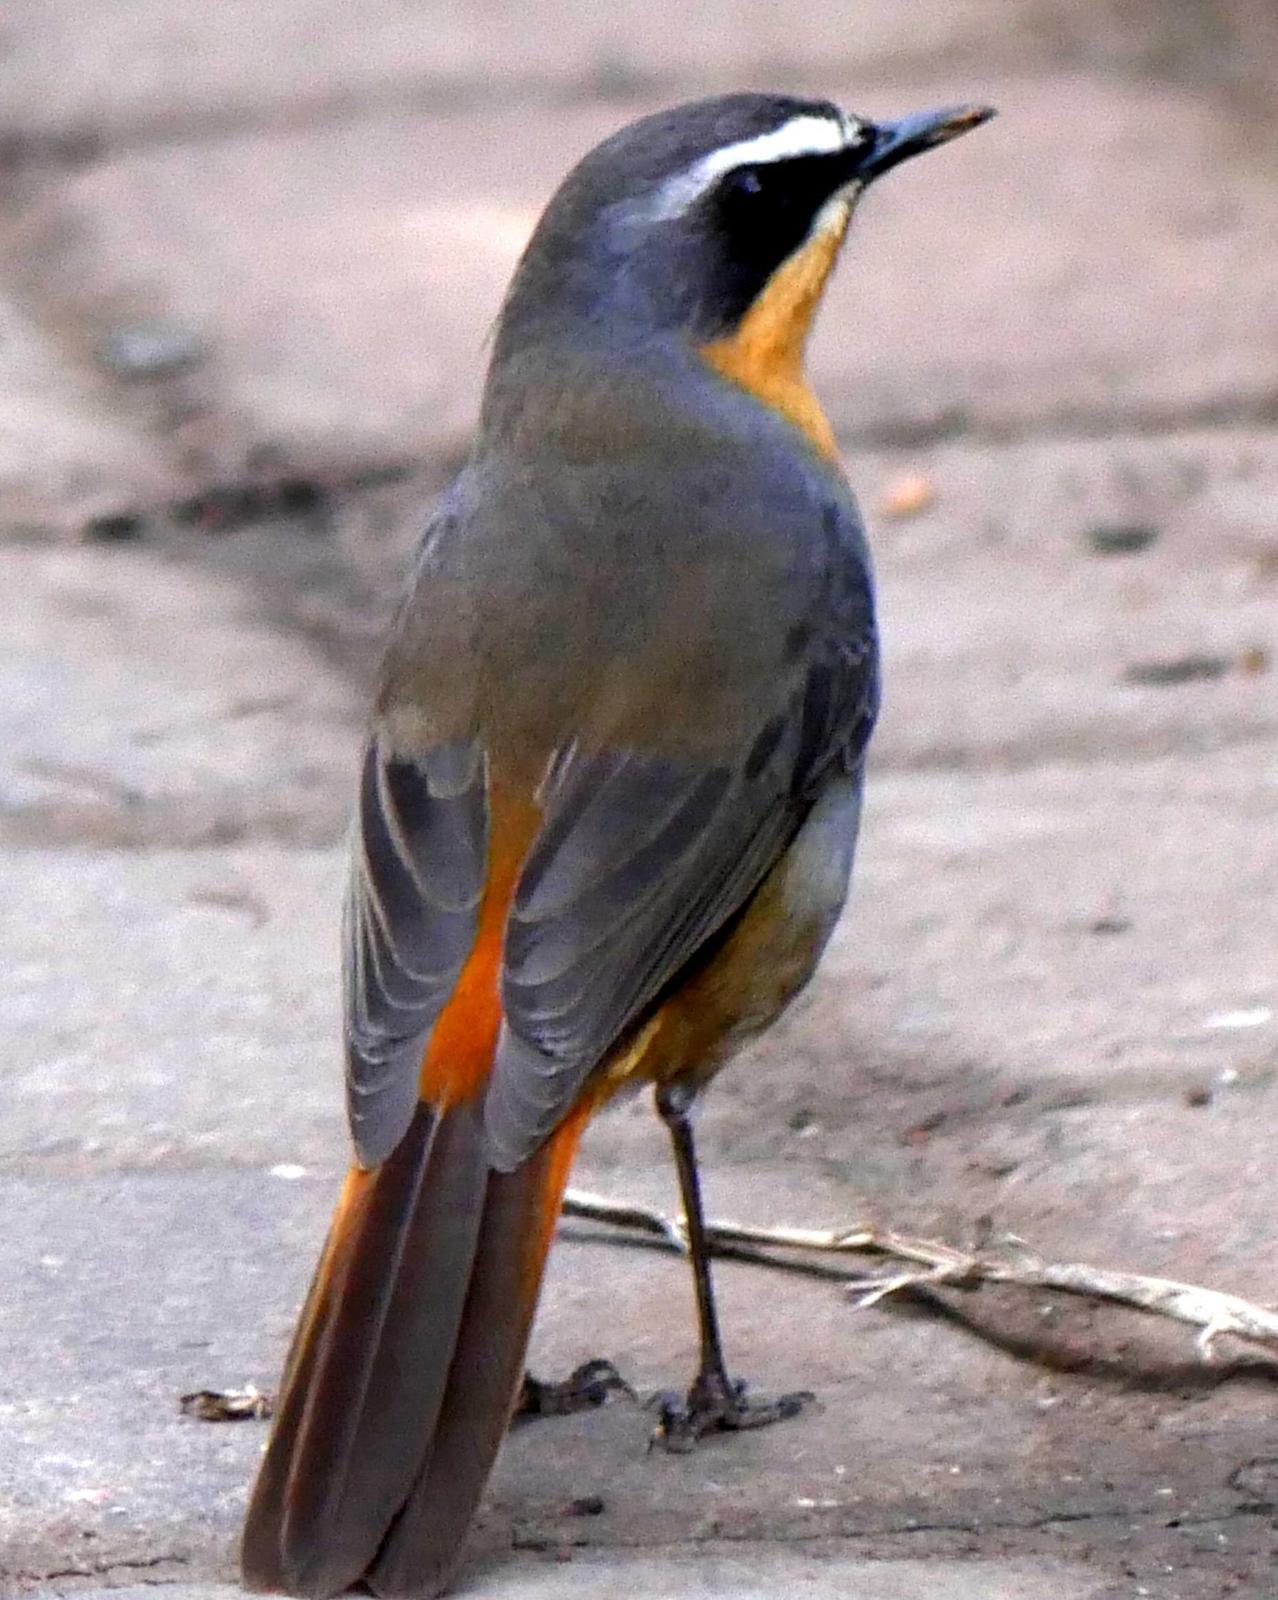 Cape Robin-Chat Photo by Peter Lowe